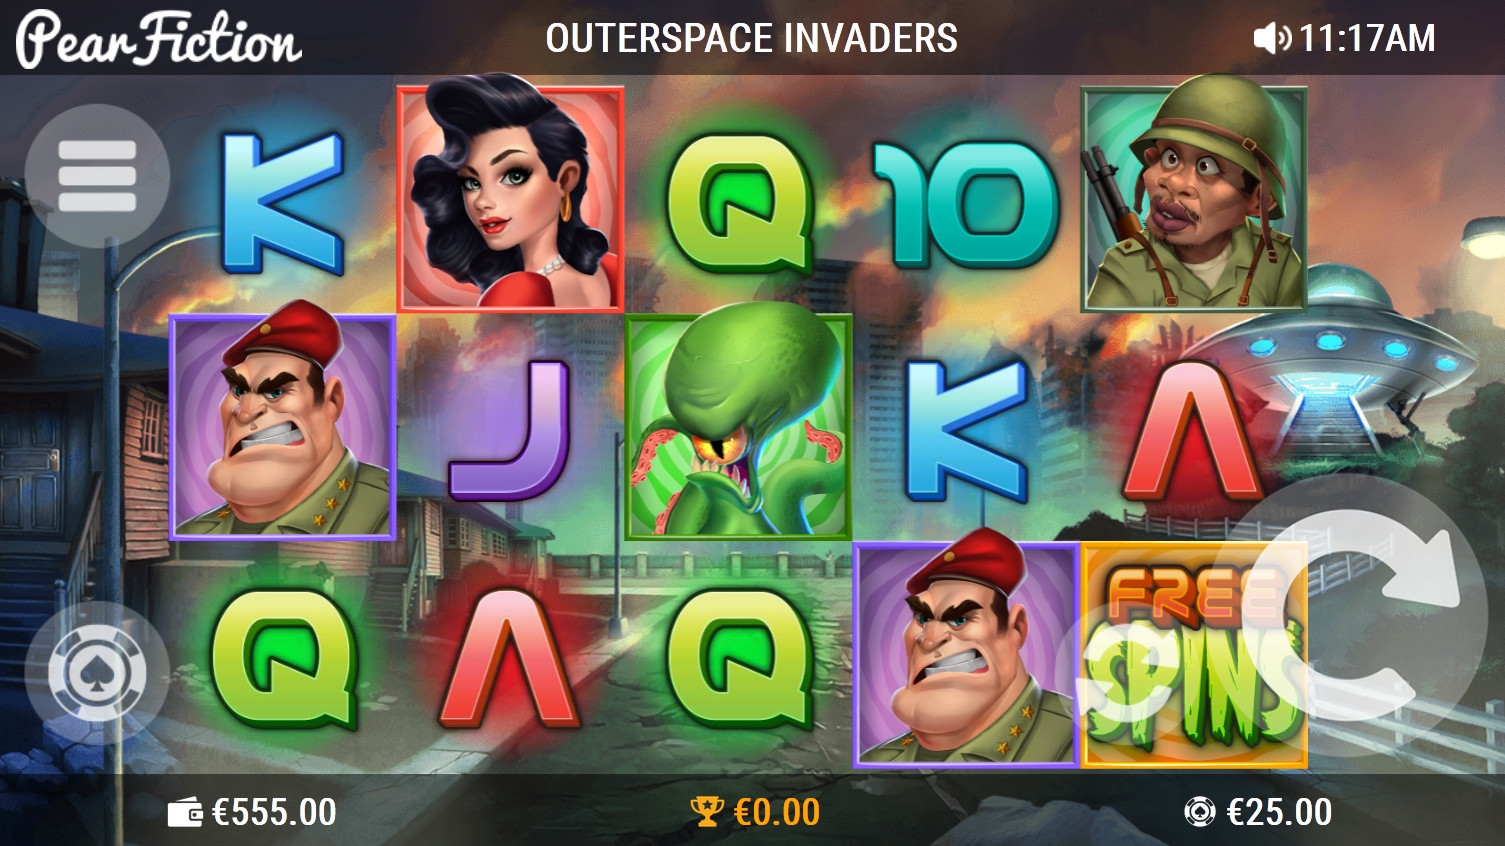 Outerspace Invaders (Outerspace Invaders) from category Slots